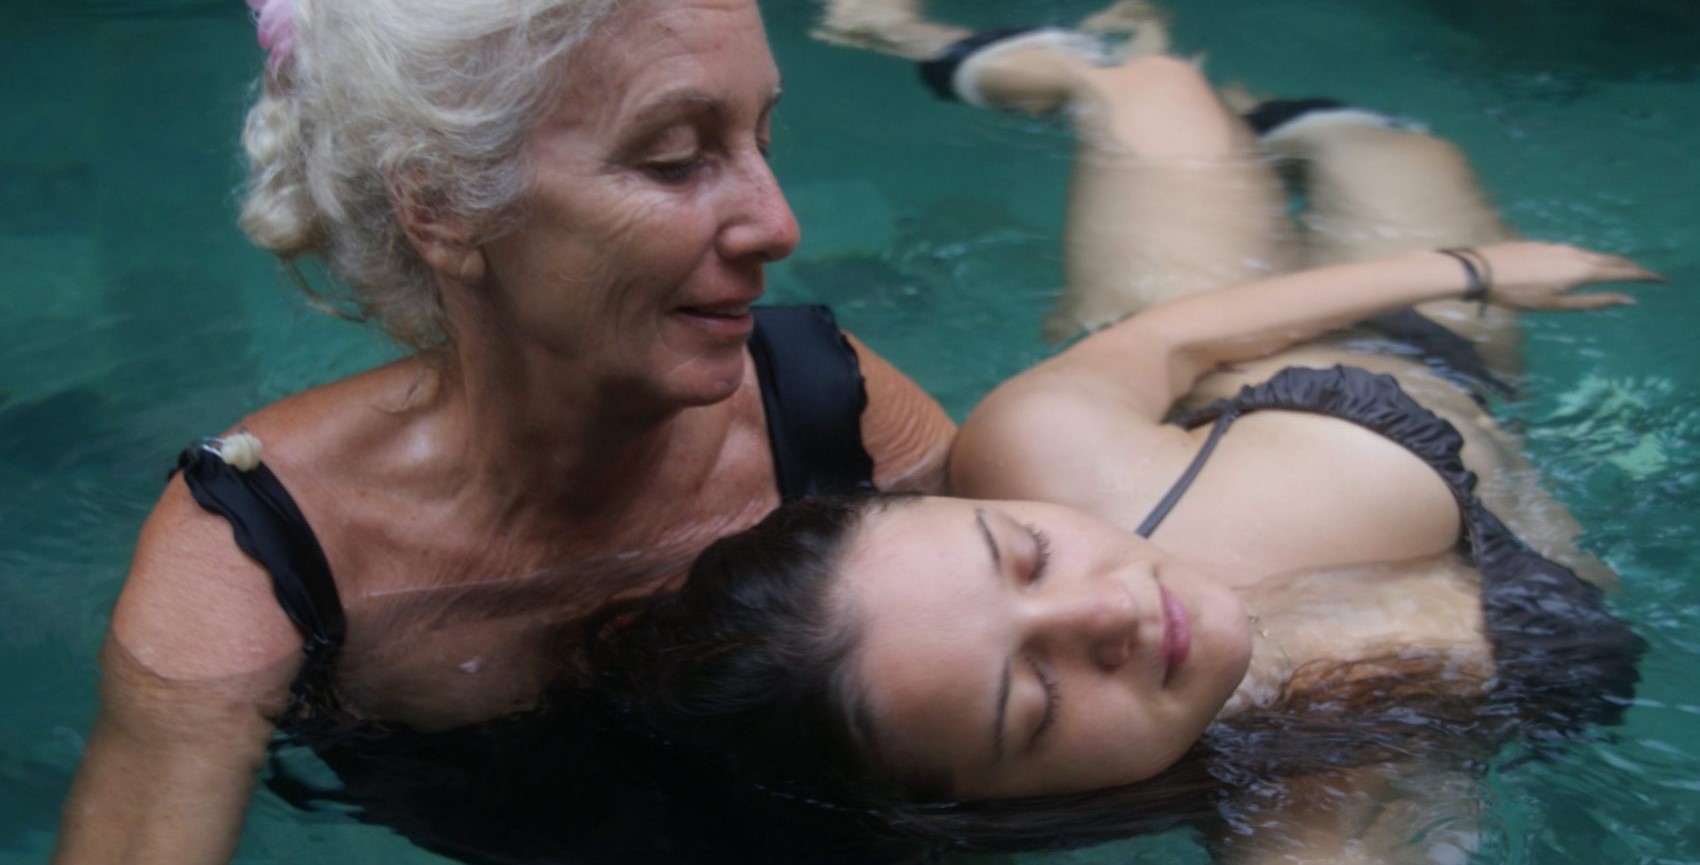 Aqua Healing - a unique experience of weightlessness to infinity